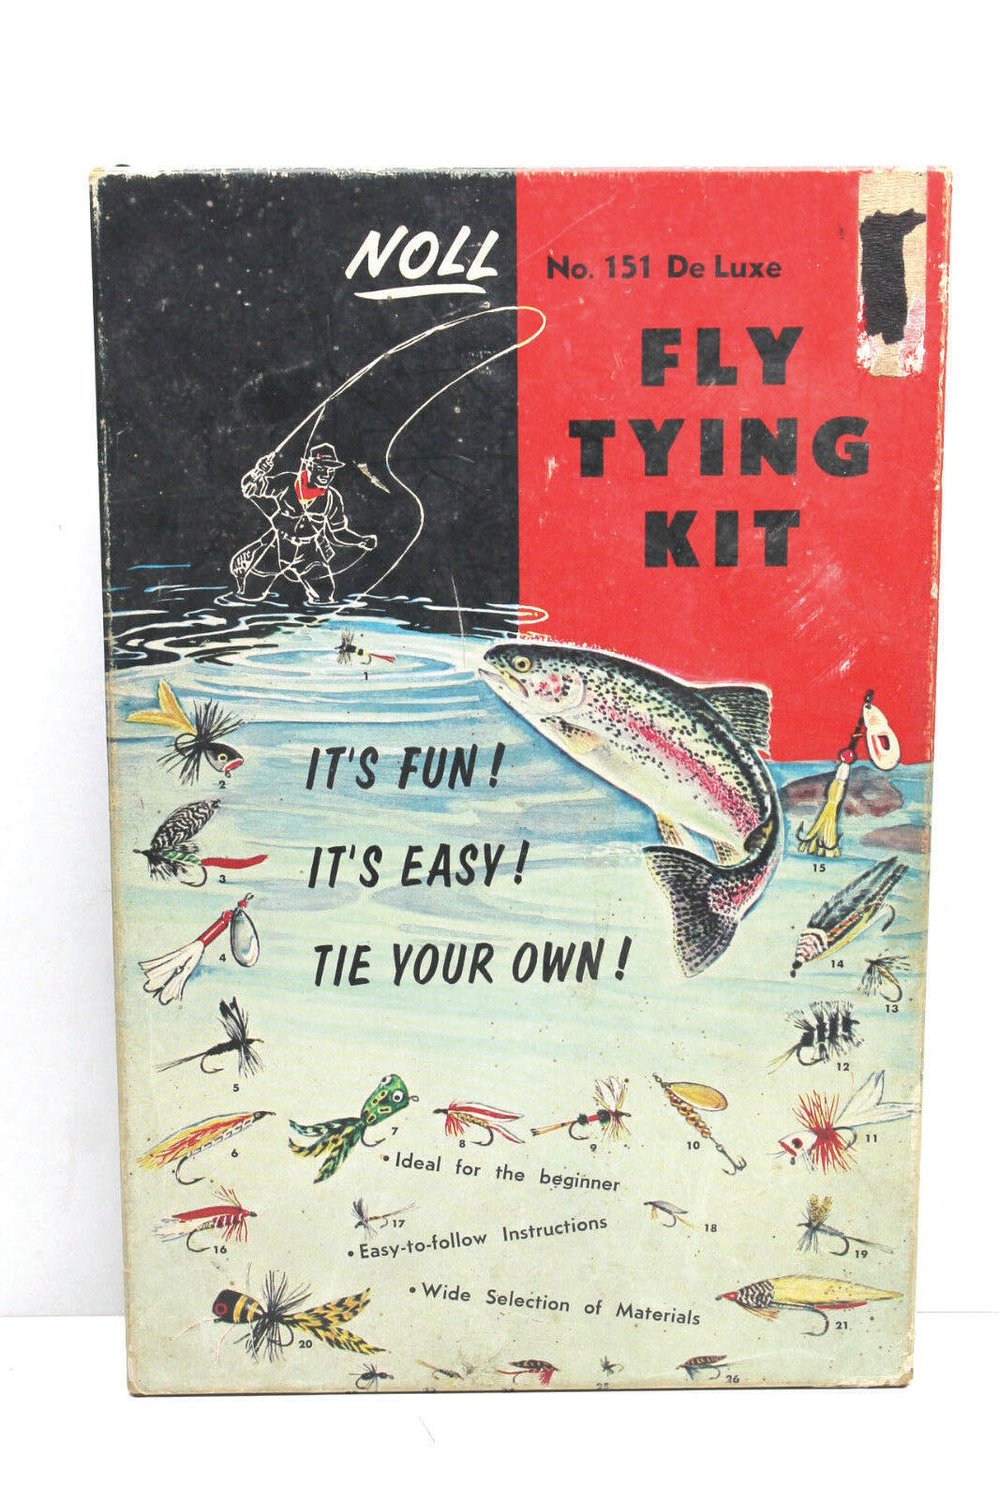 “The Art of Fly Tying” was conceived by Doylestown’s H.J. Noll (ca.1906-1982) and written by well-known author of fishing books, Charles M. Wetzel.